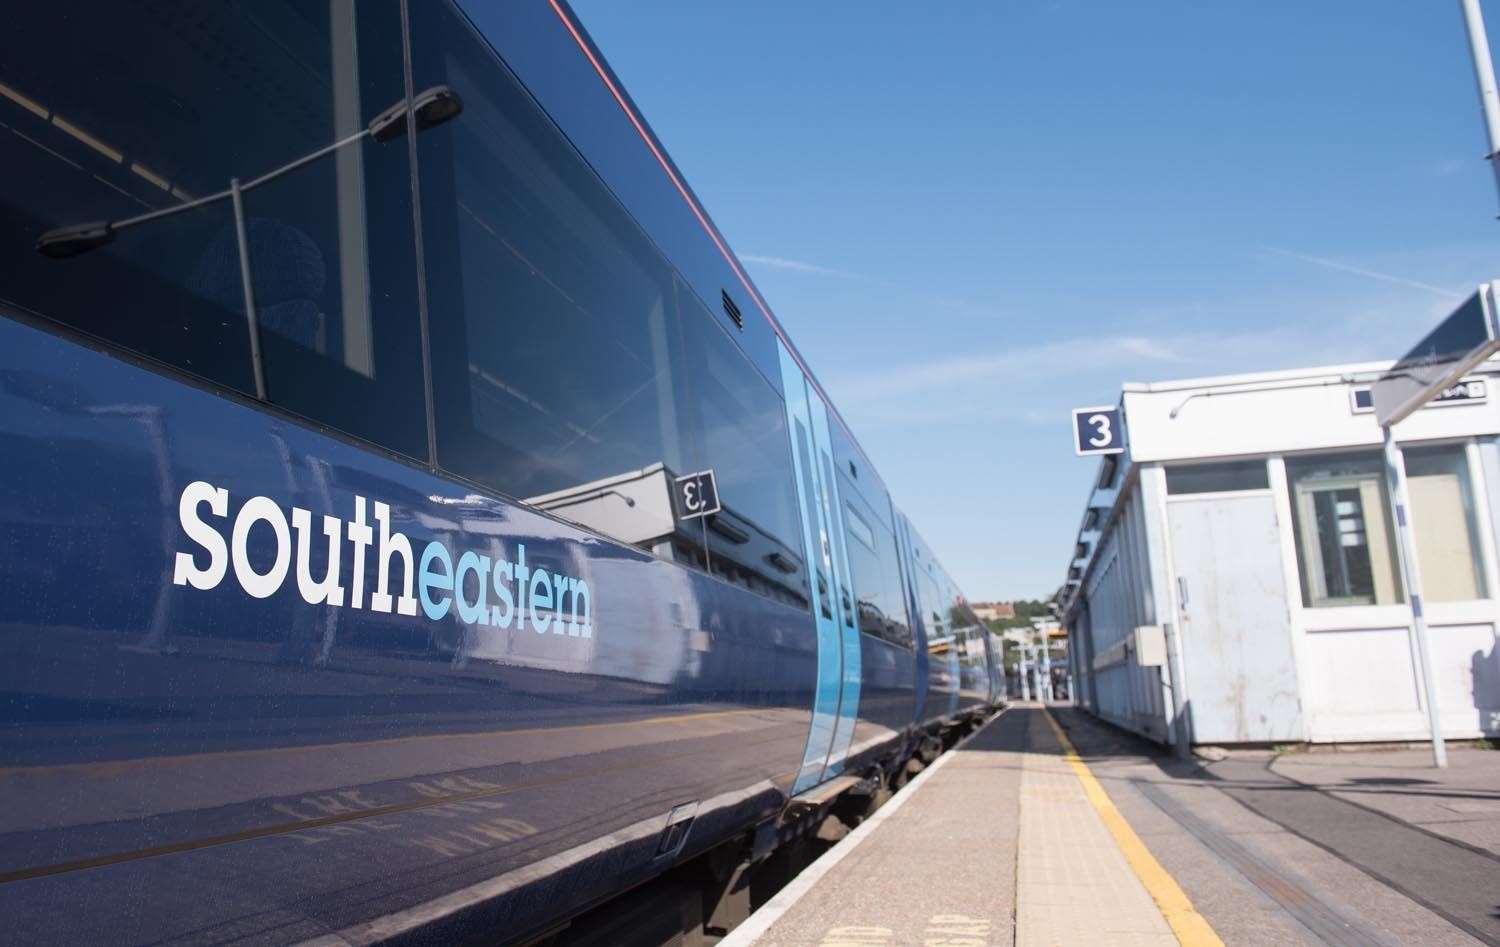 Thousands have signed a petition to save Southeastern services